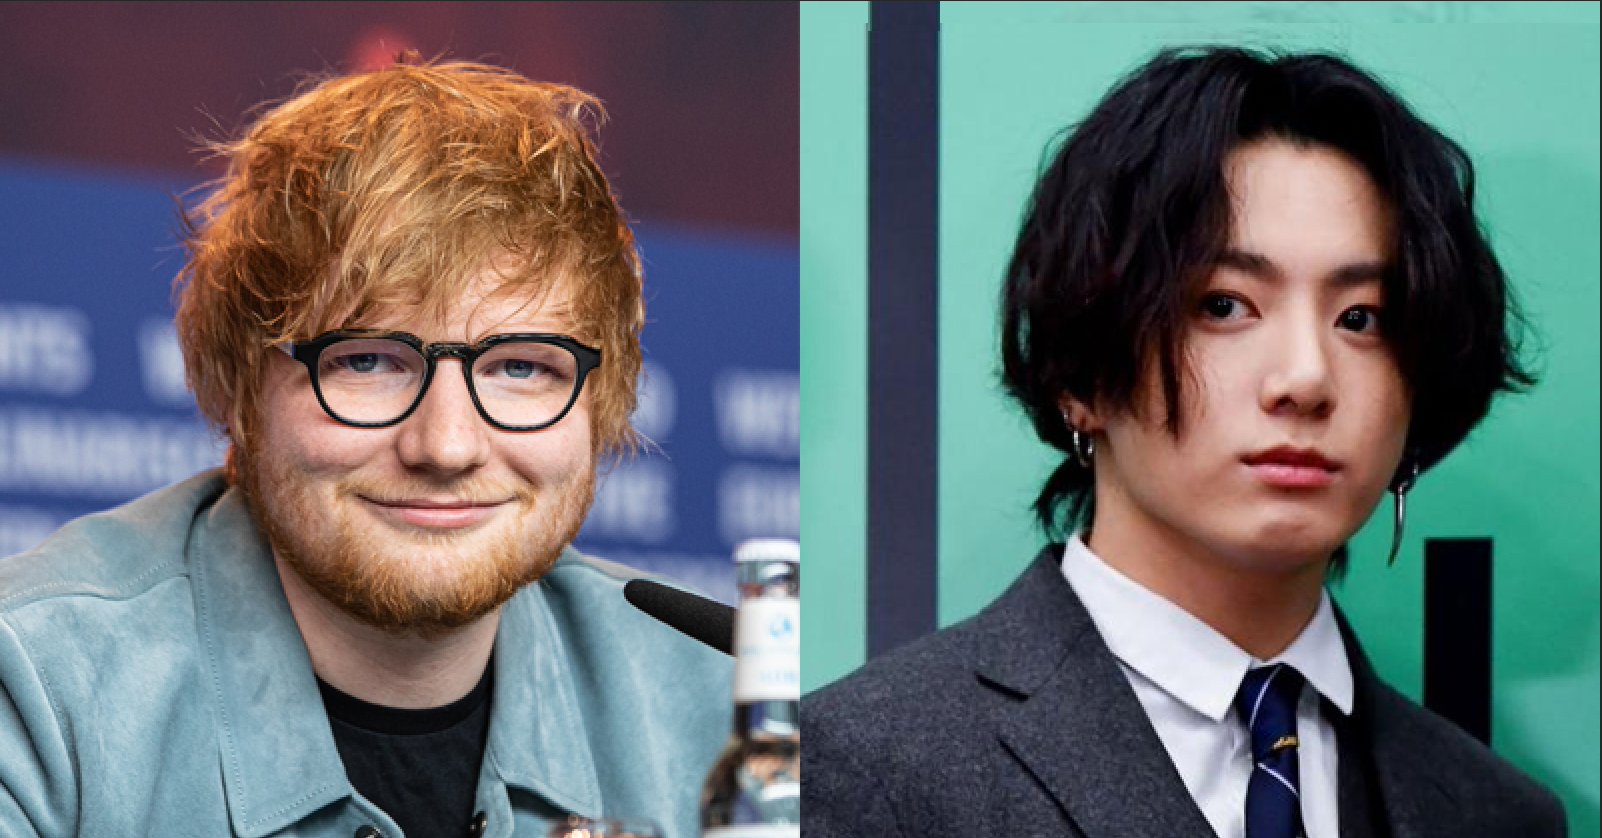 Ed Sheeran Confirms His Participation In The Production of BTS’s New Song